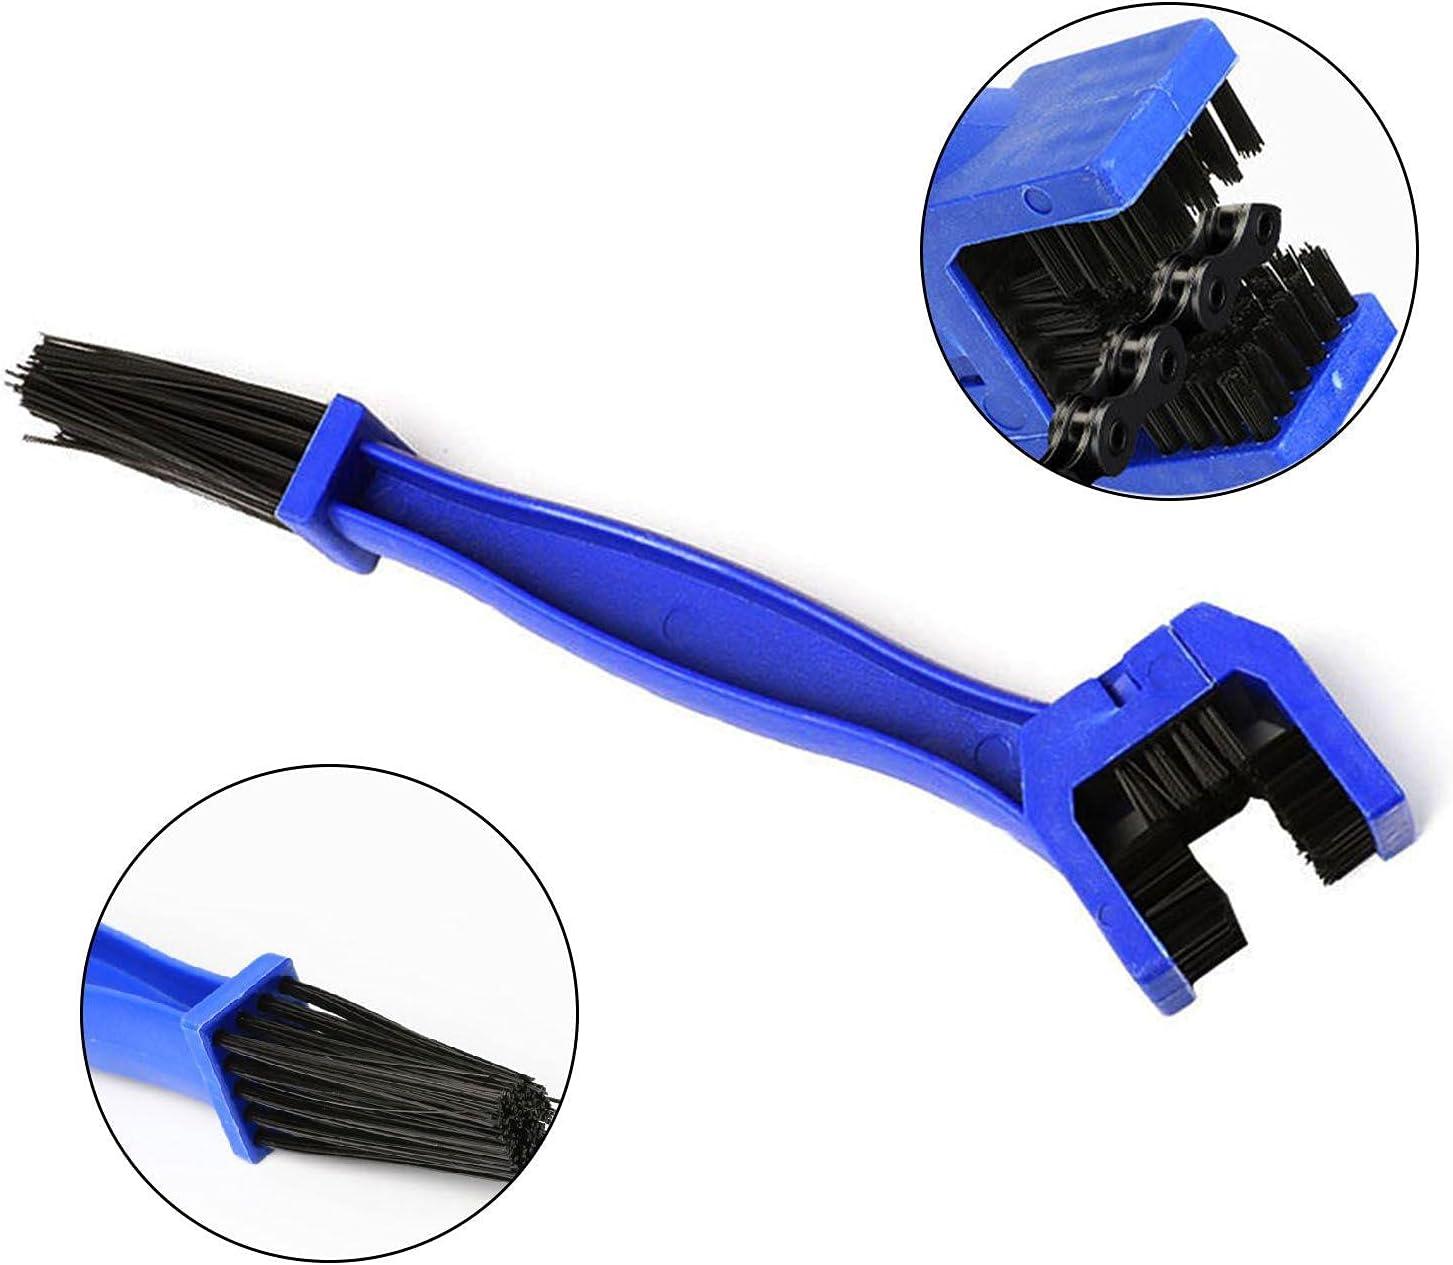 LaXon Bike Cleaning Tools,Bicycle Chain Cleaner,10 Inch Cycling Bicycle  Gear Grunge Brush ,Suitable for Mountain,Road,City,Hybrid, BMX Bike Folding  Bike and Motorcycle,Blue